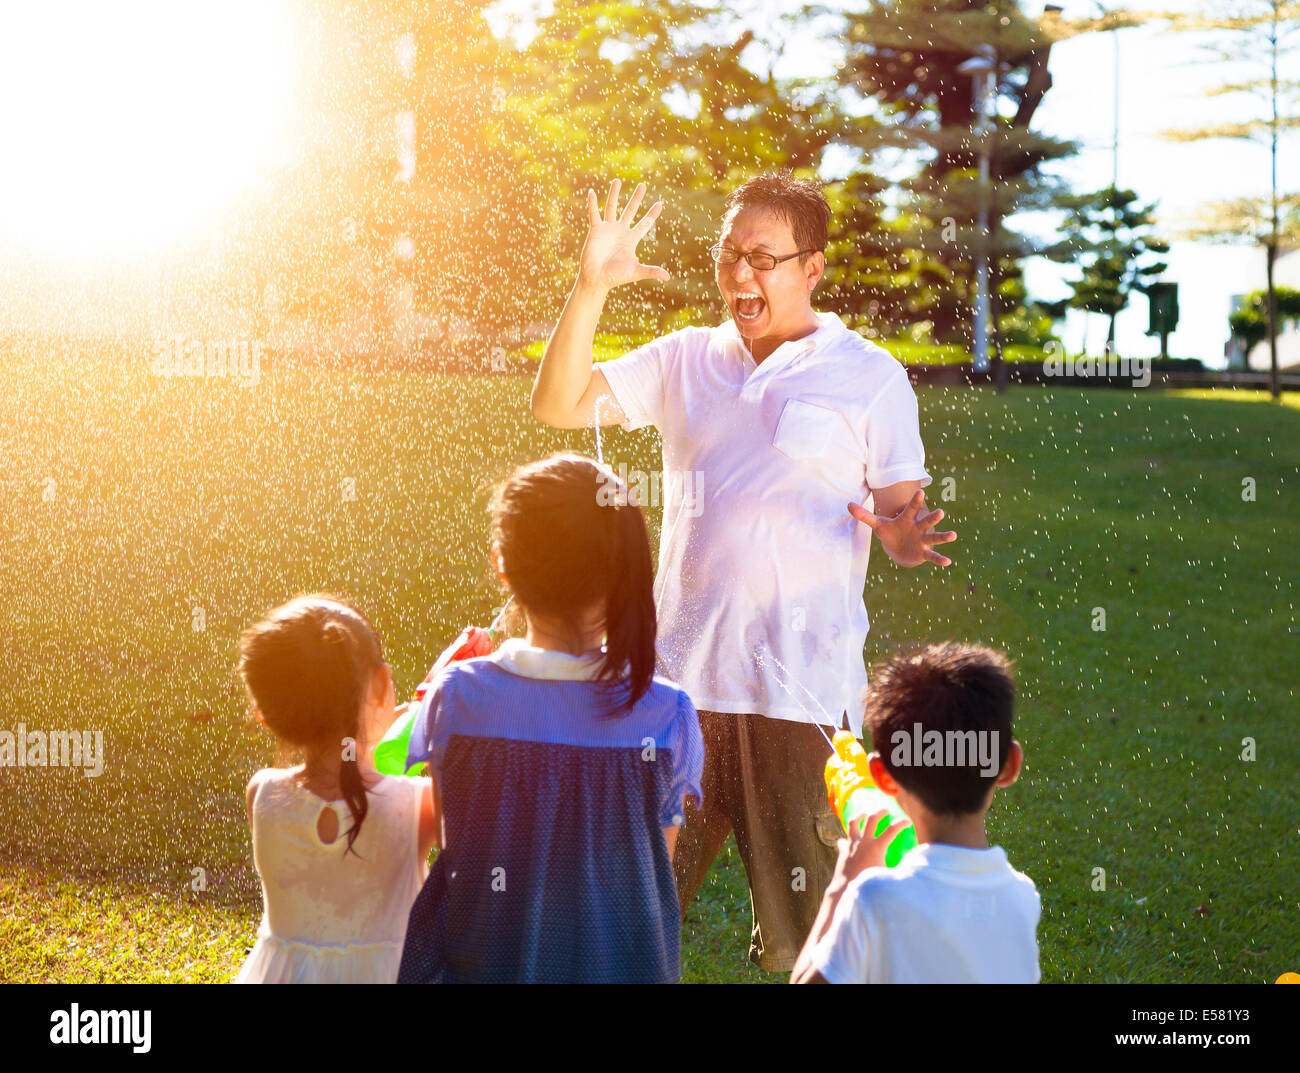 children spray water to father together by water guns Stock Photo